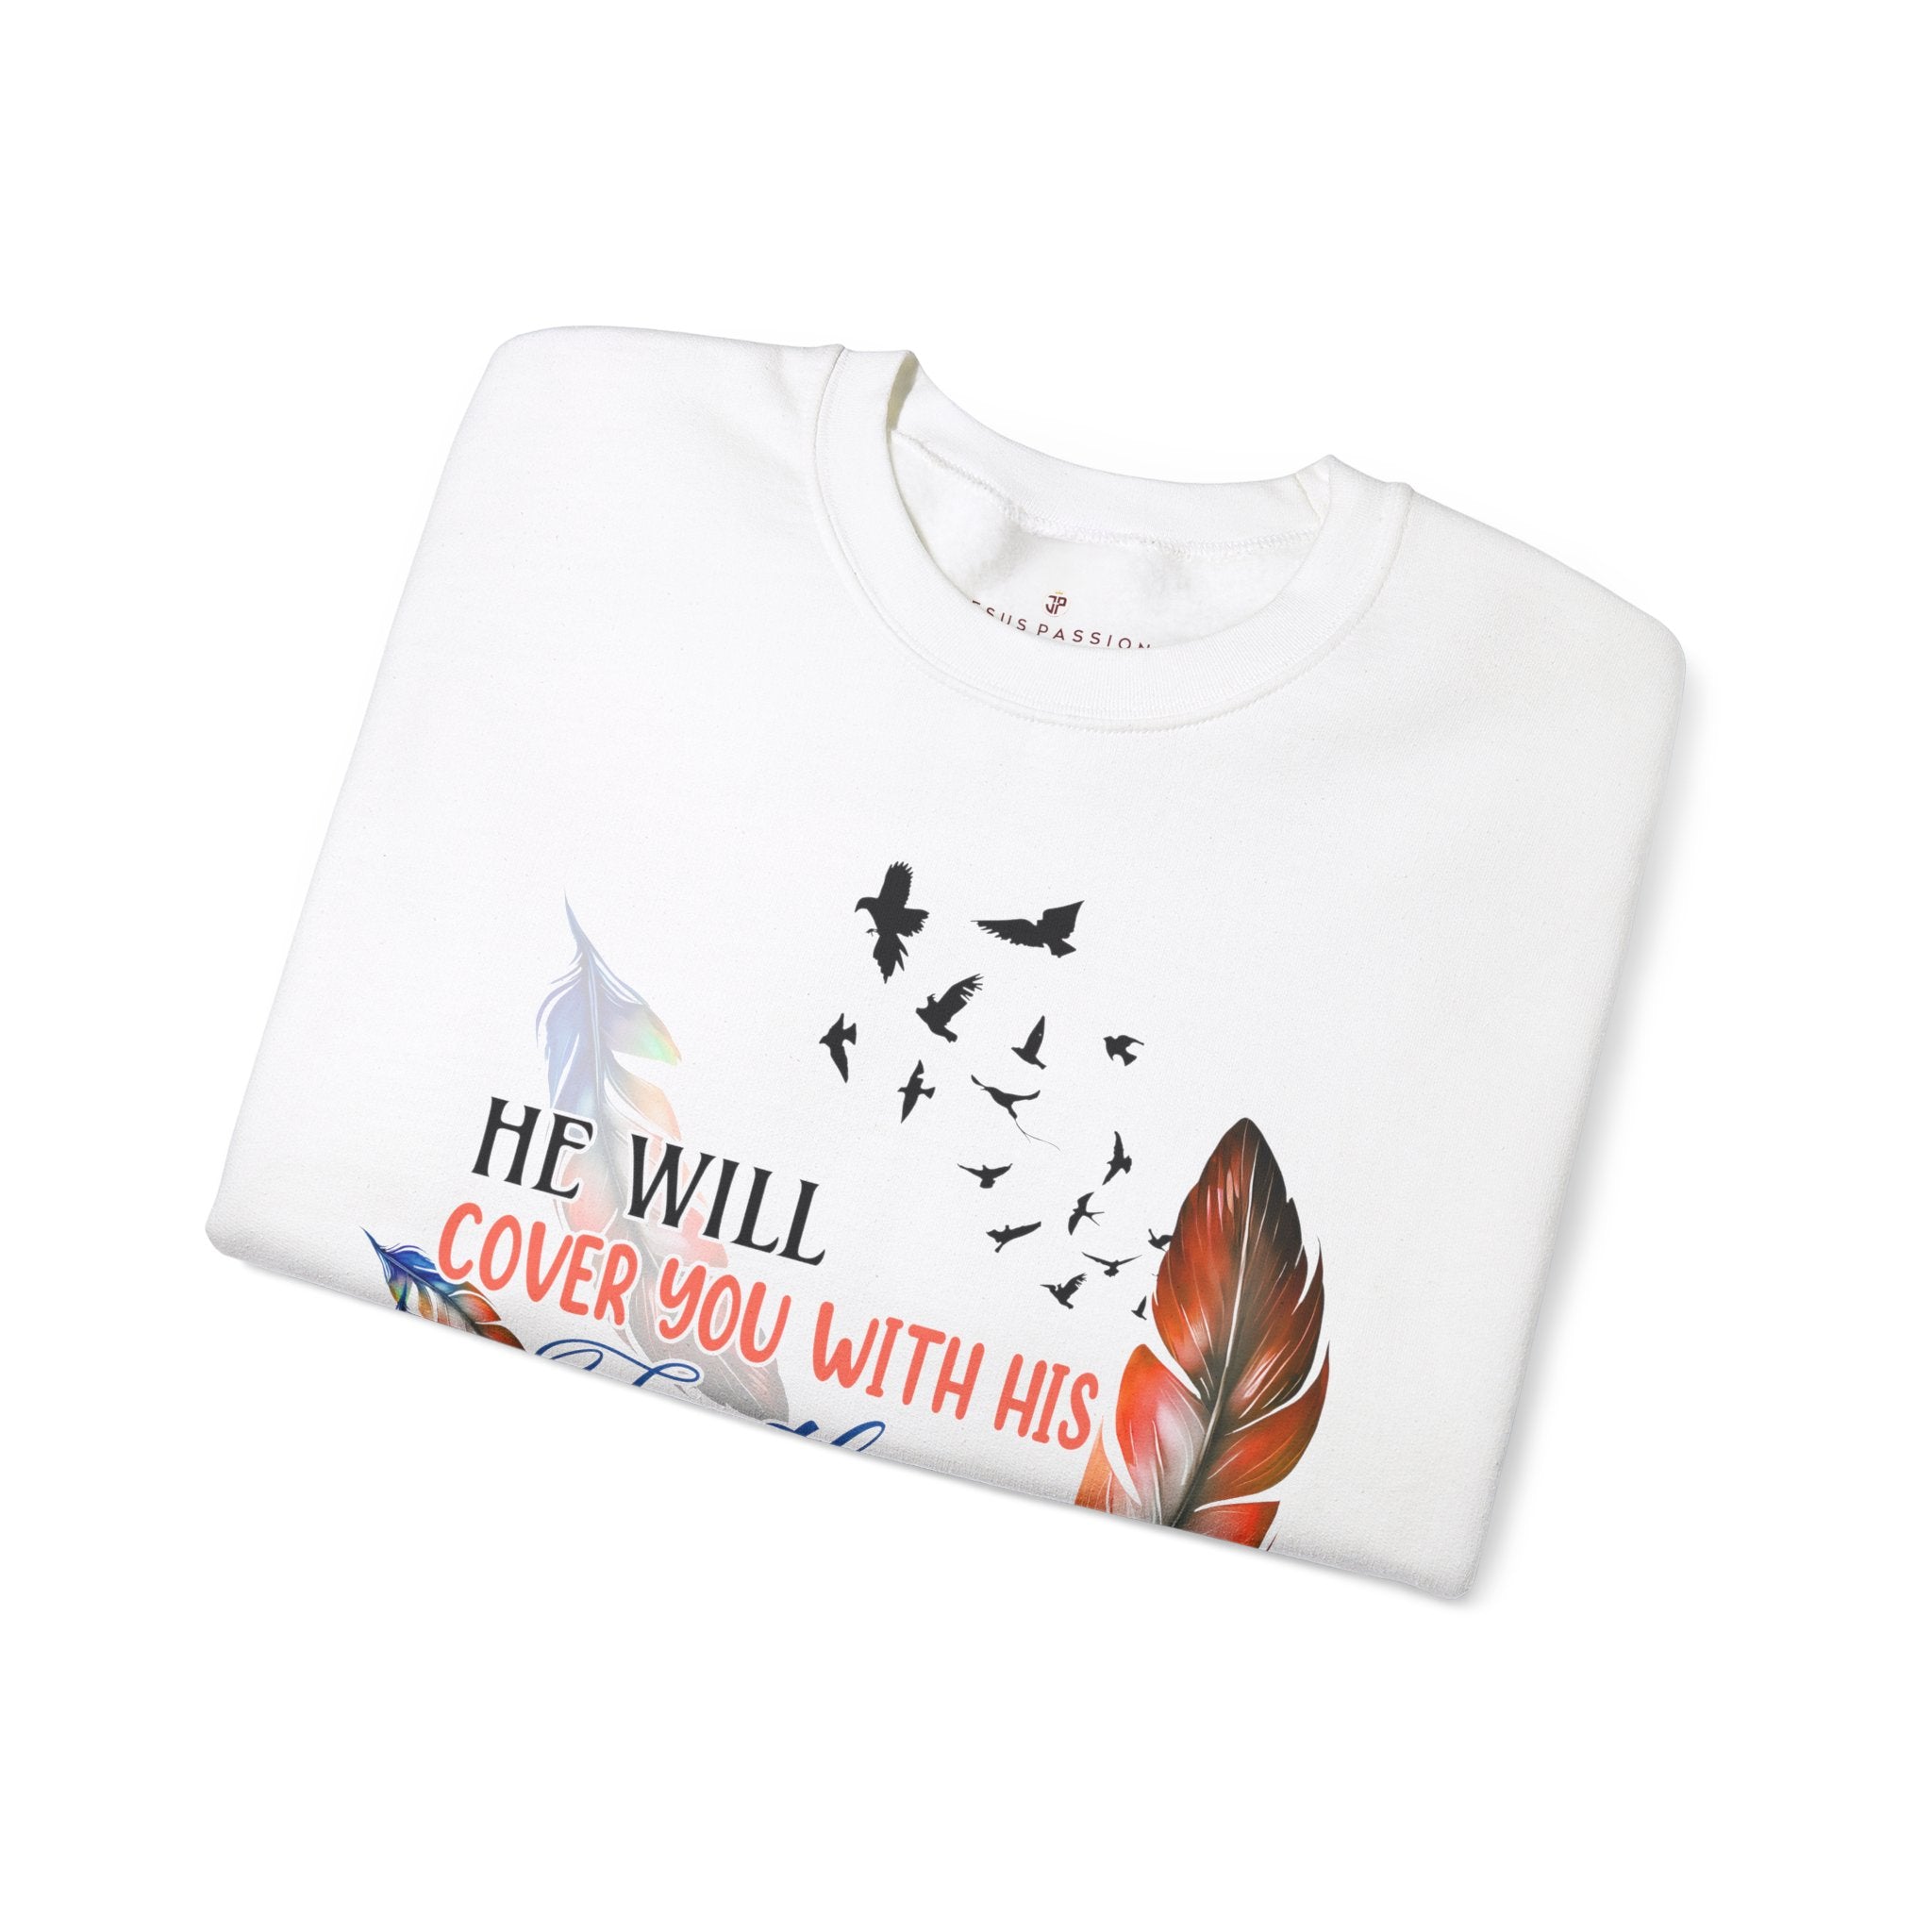 He Will Cover you with Feathers Women's Fleece Unisex-Fit Sweatshirt Light Blue / White Size: S Color: Light Blue Jesus Passion Apparel